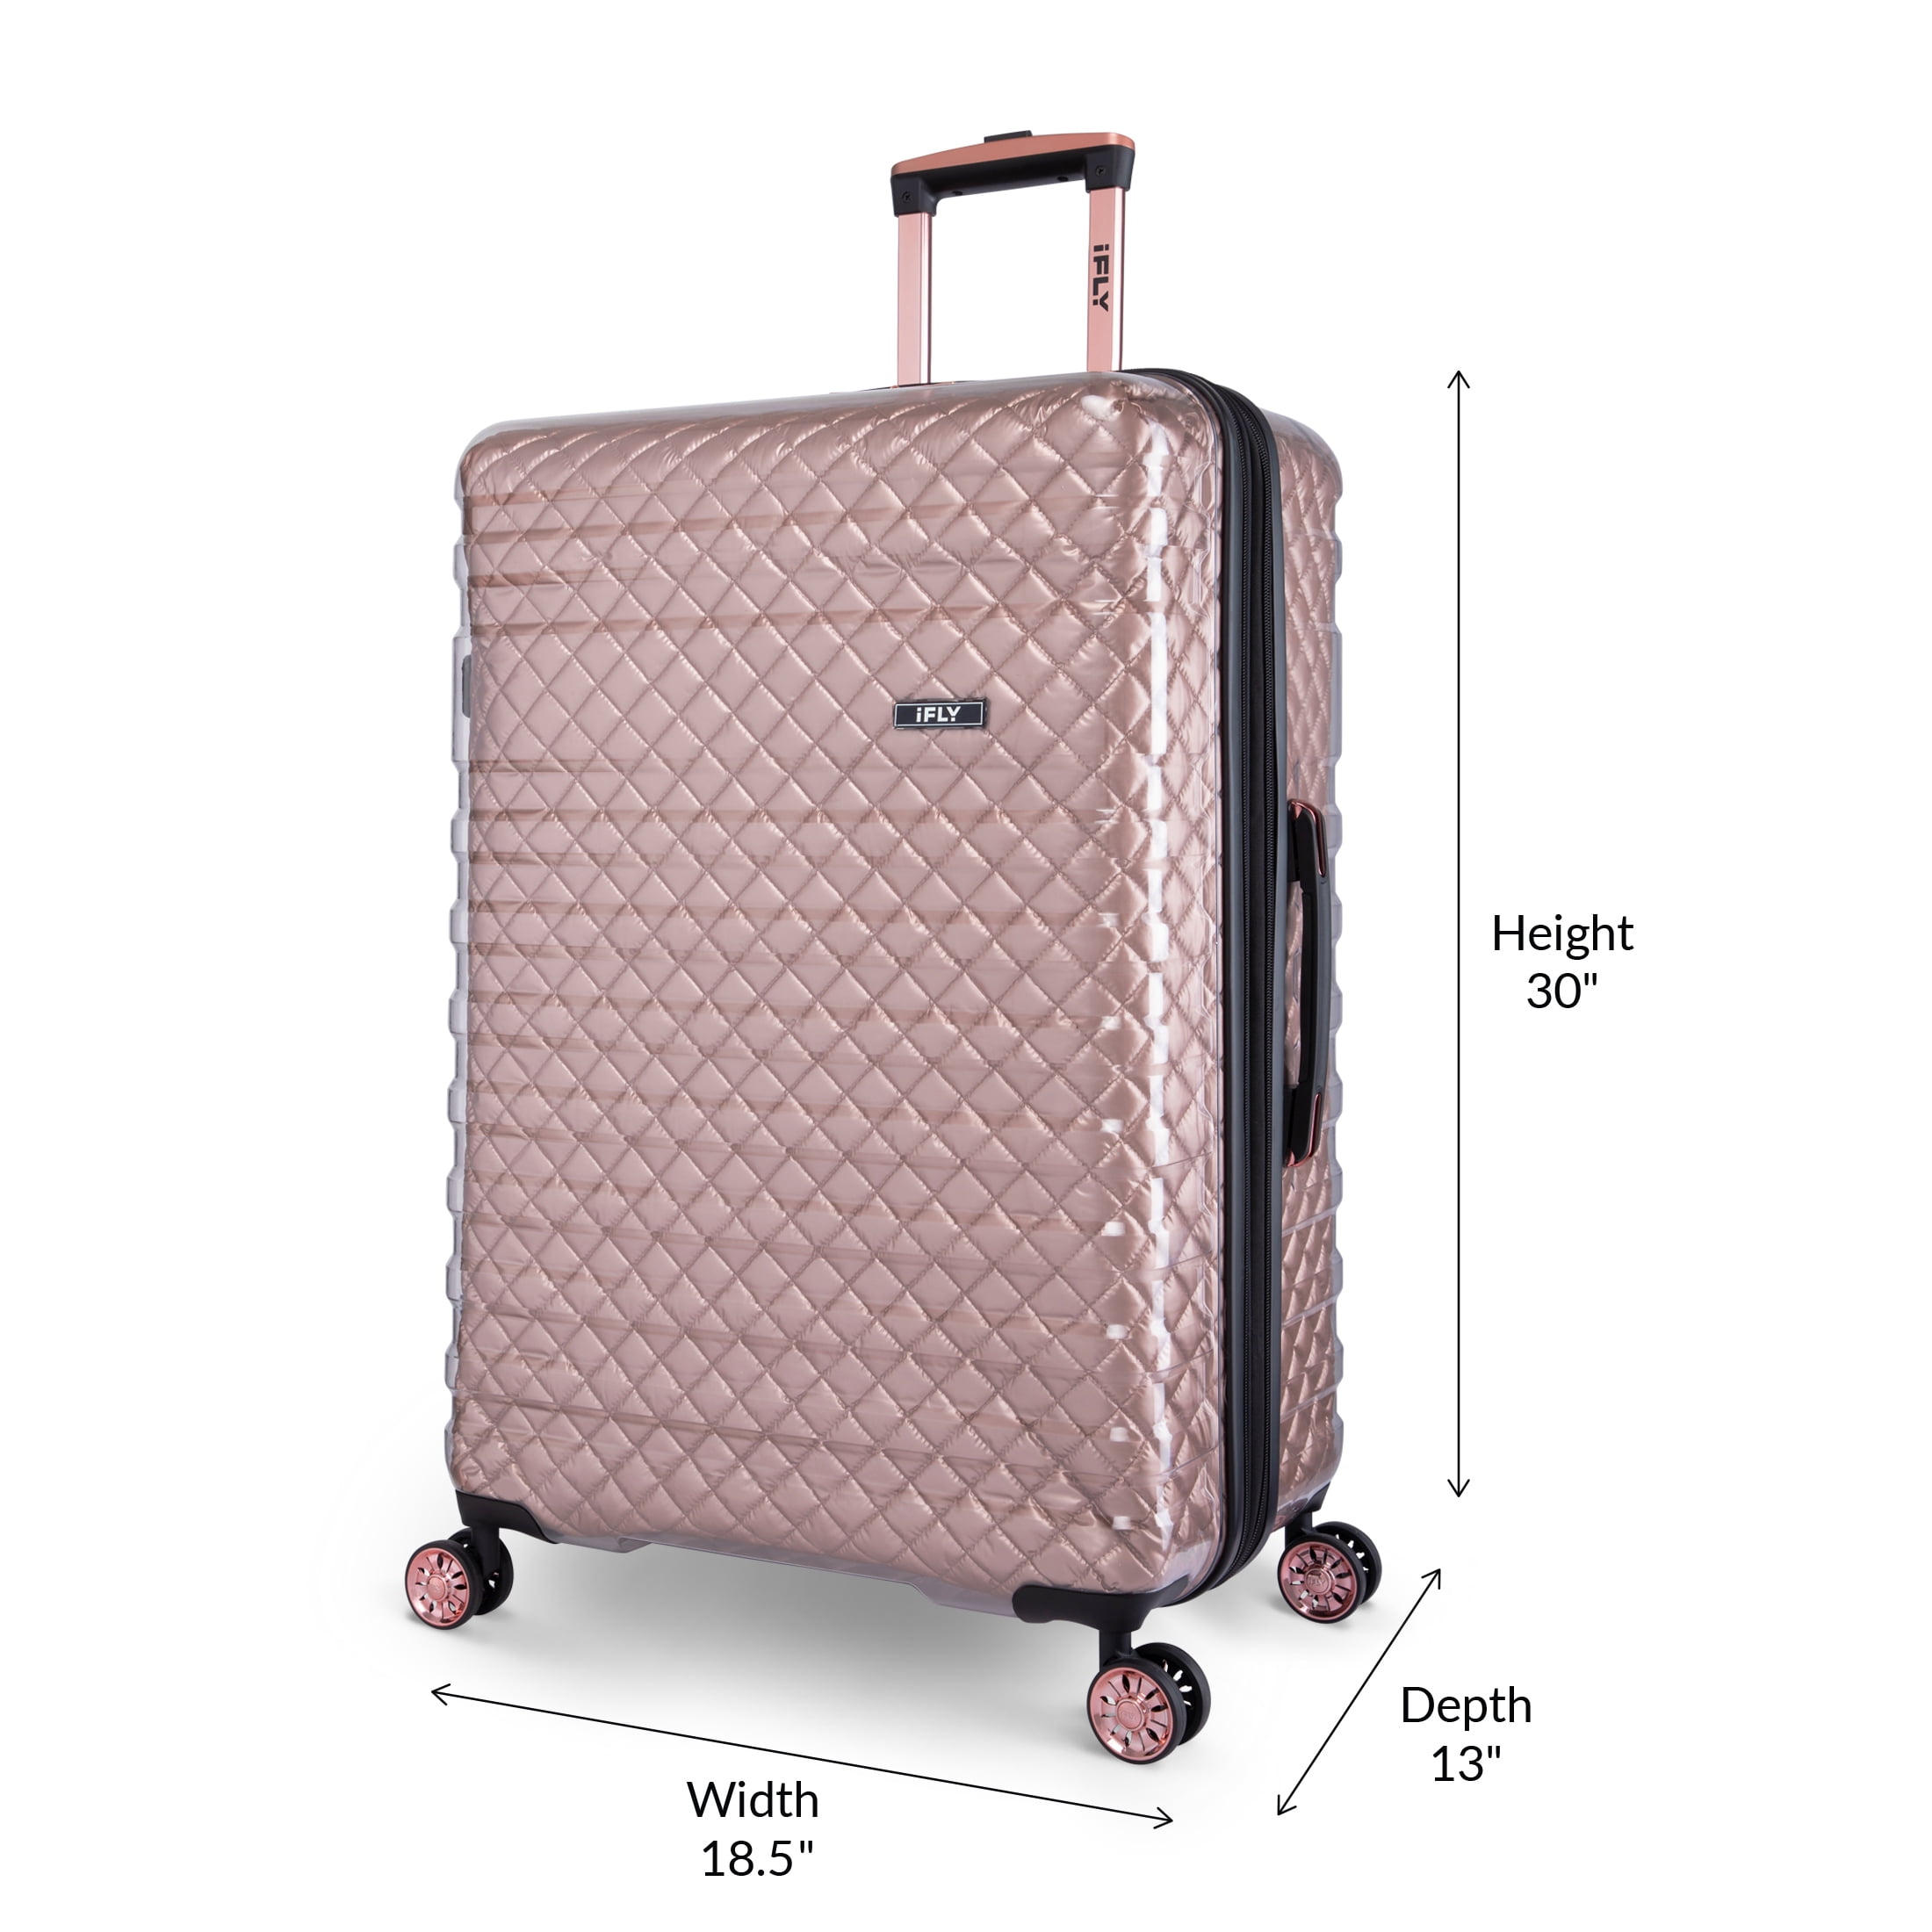 IFLY Hardside Spectre Versus Clear Luggage 28 Checked Luggage, Silver 